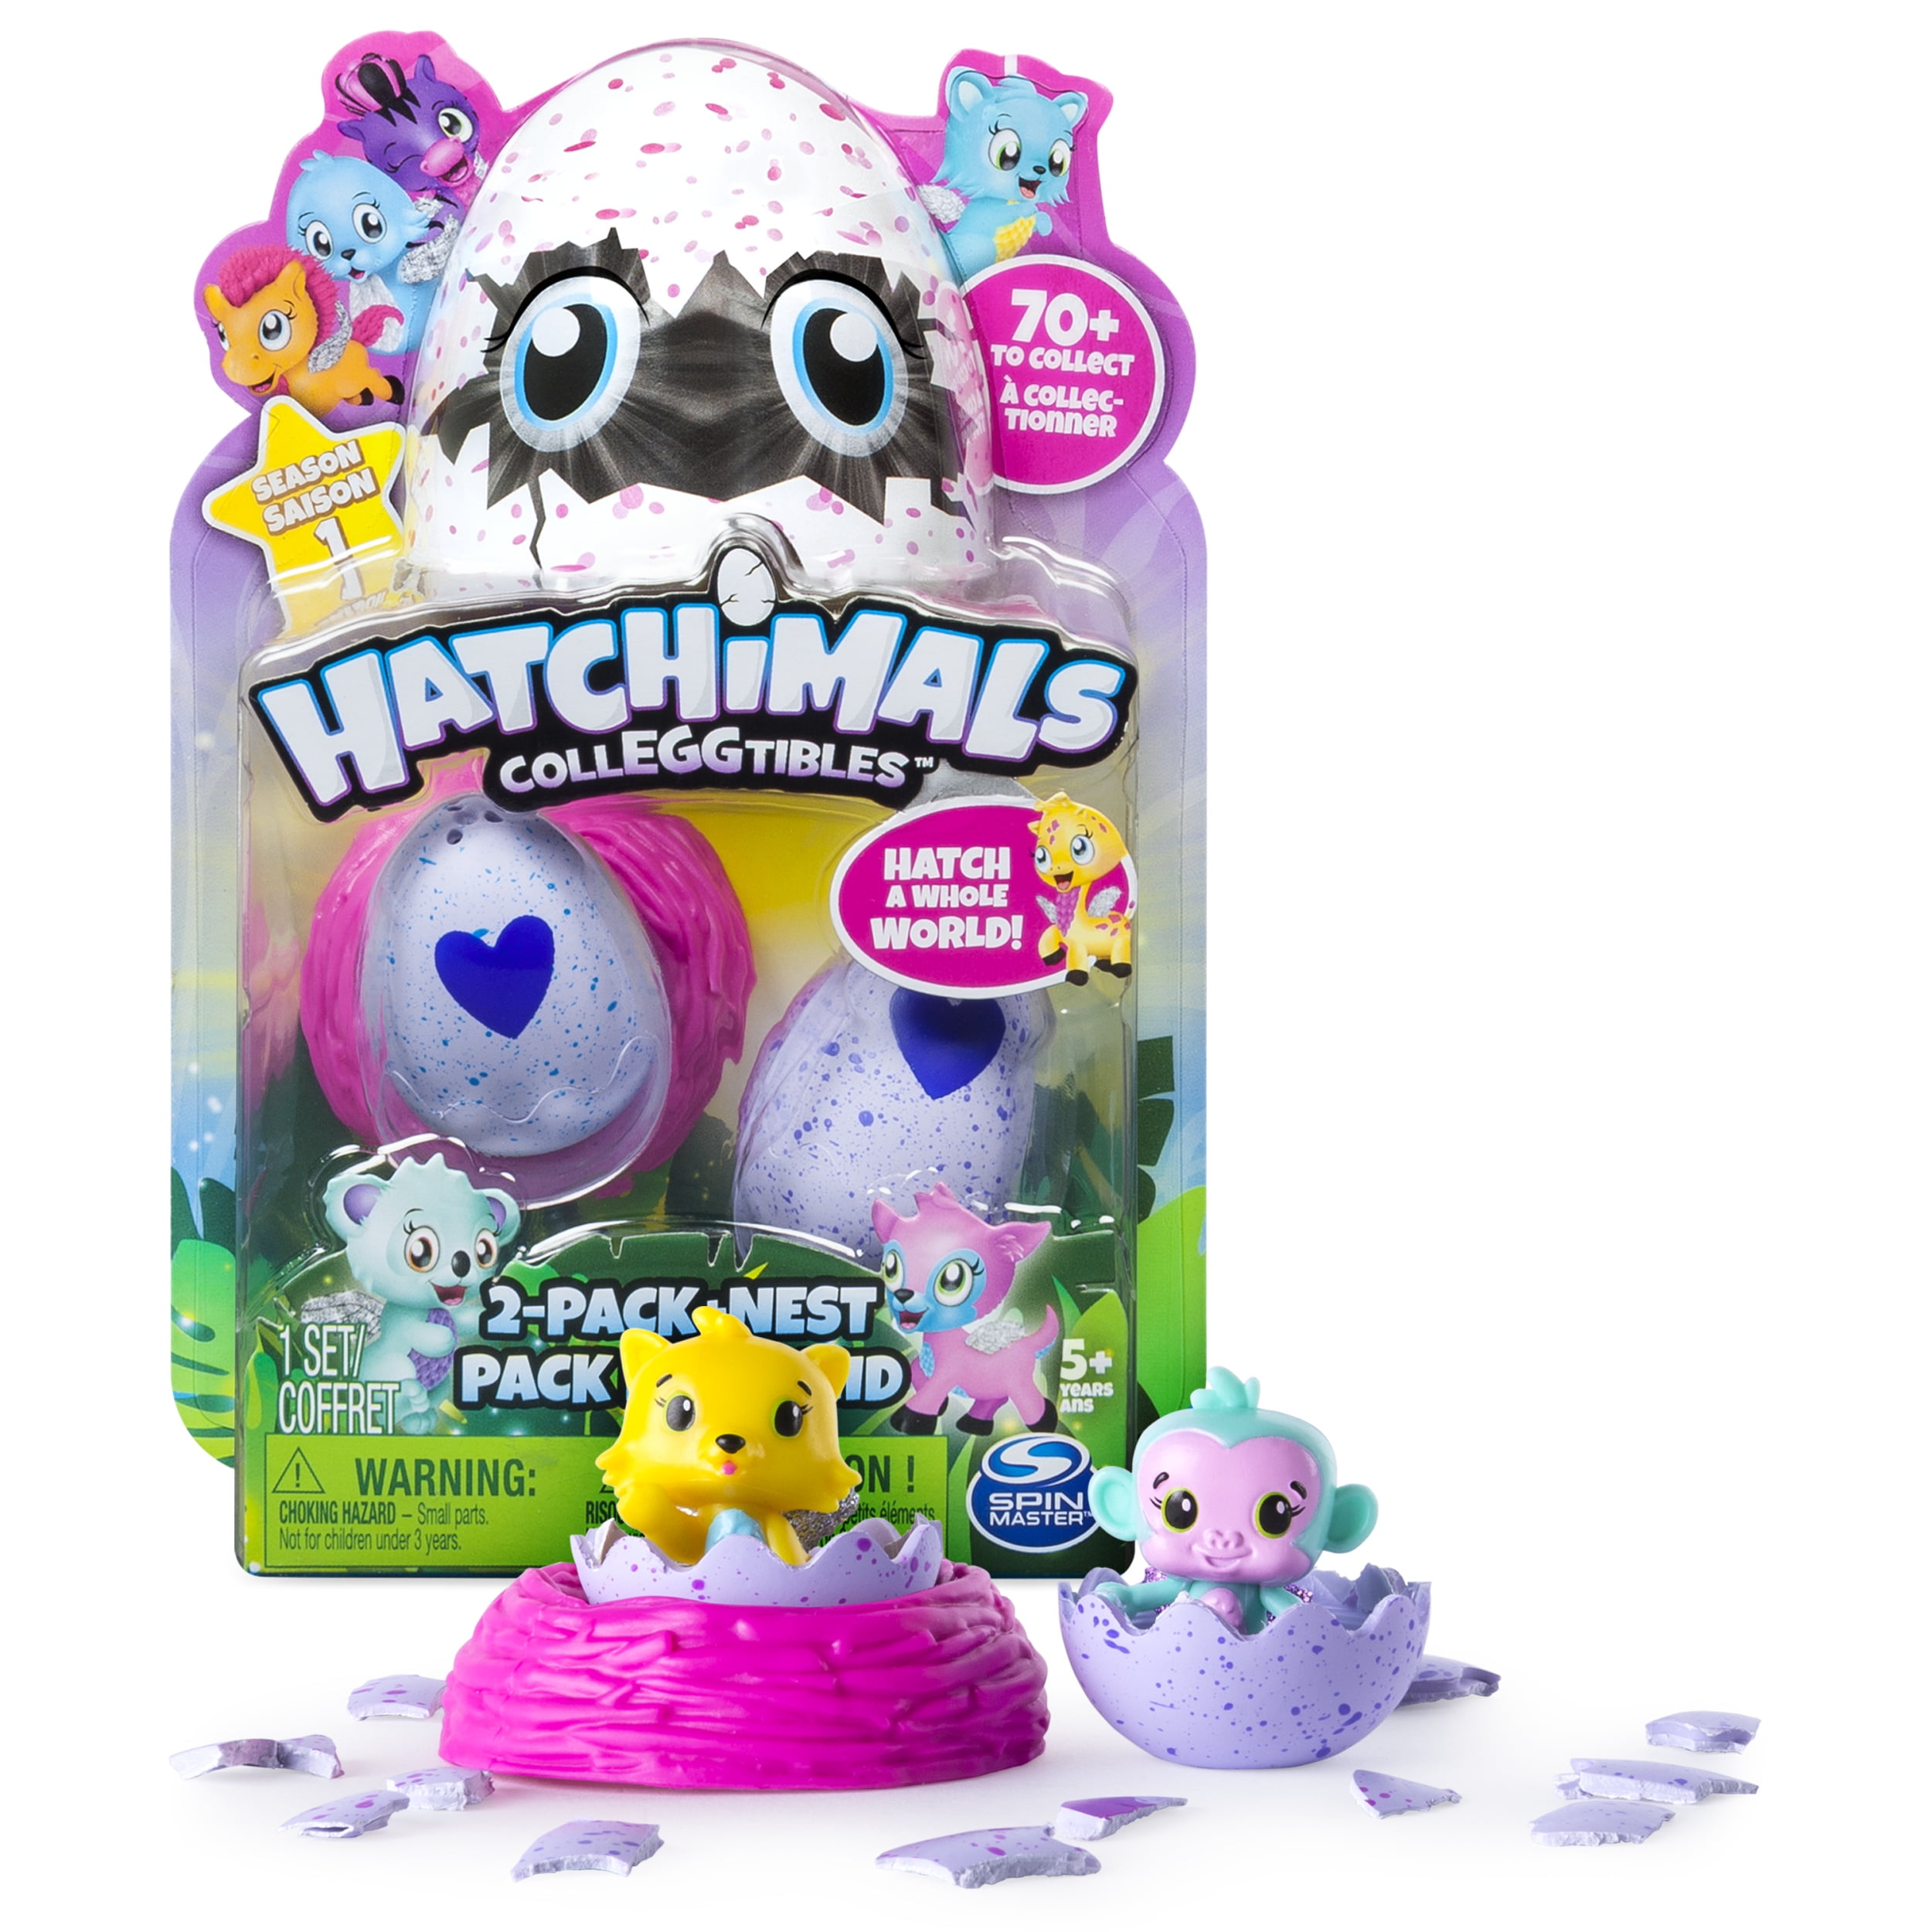 Season 2 2-Pack with 1 nest by Spin Master .. Hatchimals CollEGGtibles 